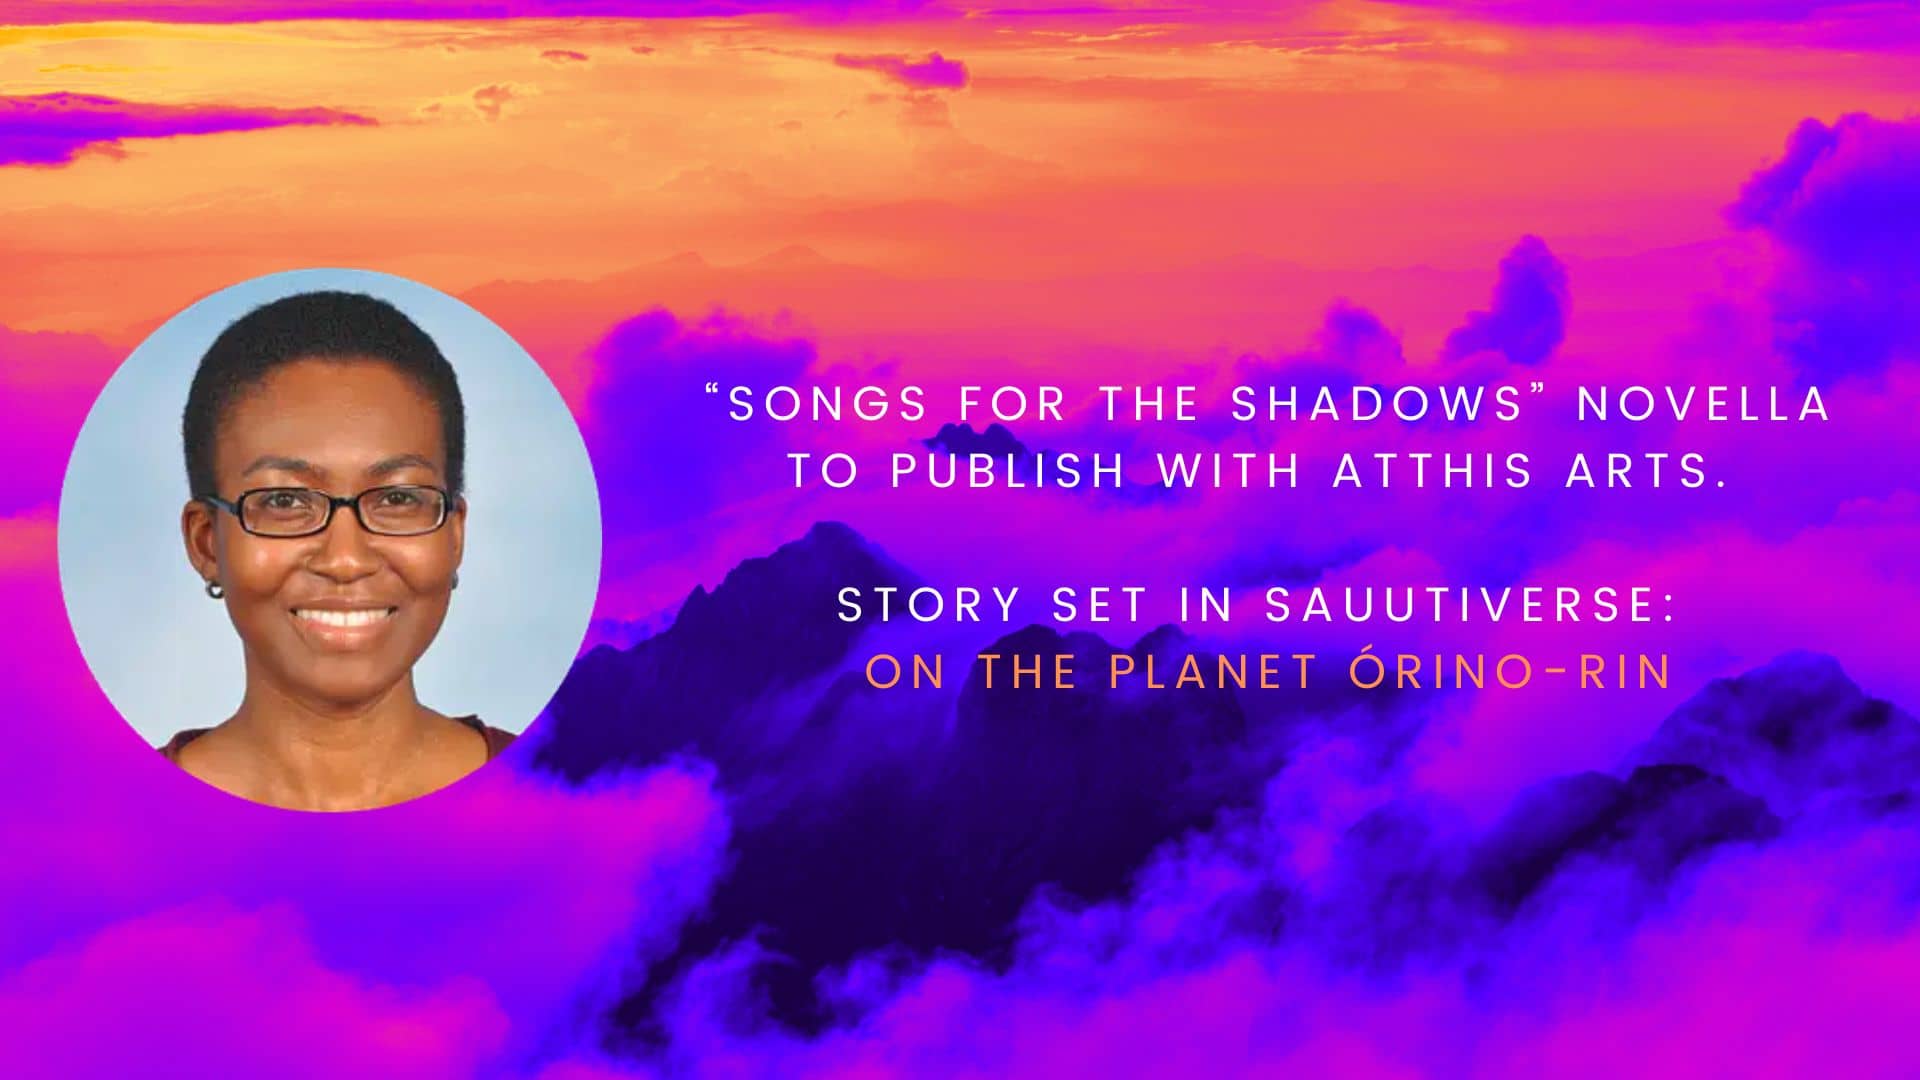 Cheryl Ntumy, Sauúti Collective Member, to Release Novella “Songs for the Shadows” in the Sauútiverse through Atthis Arts